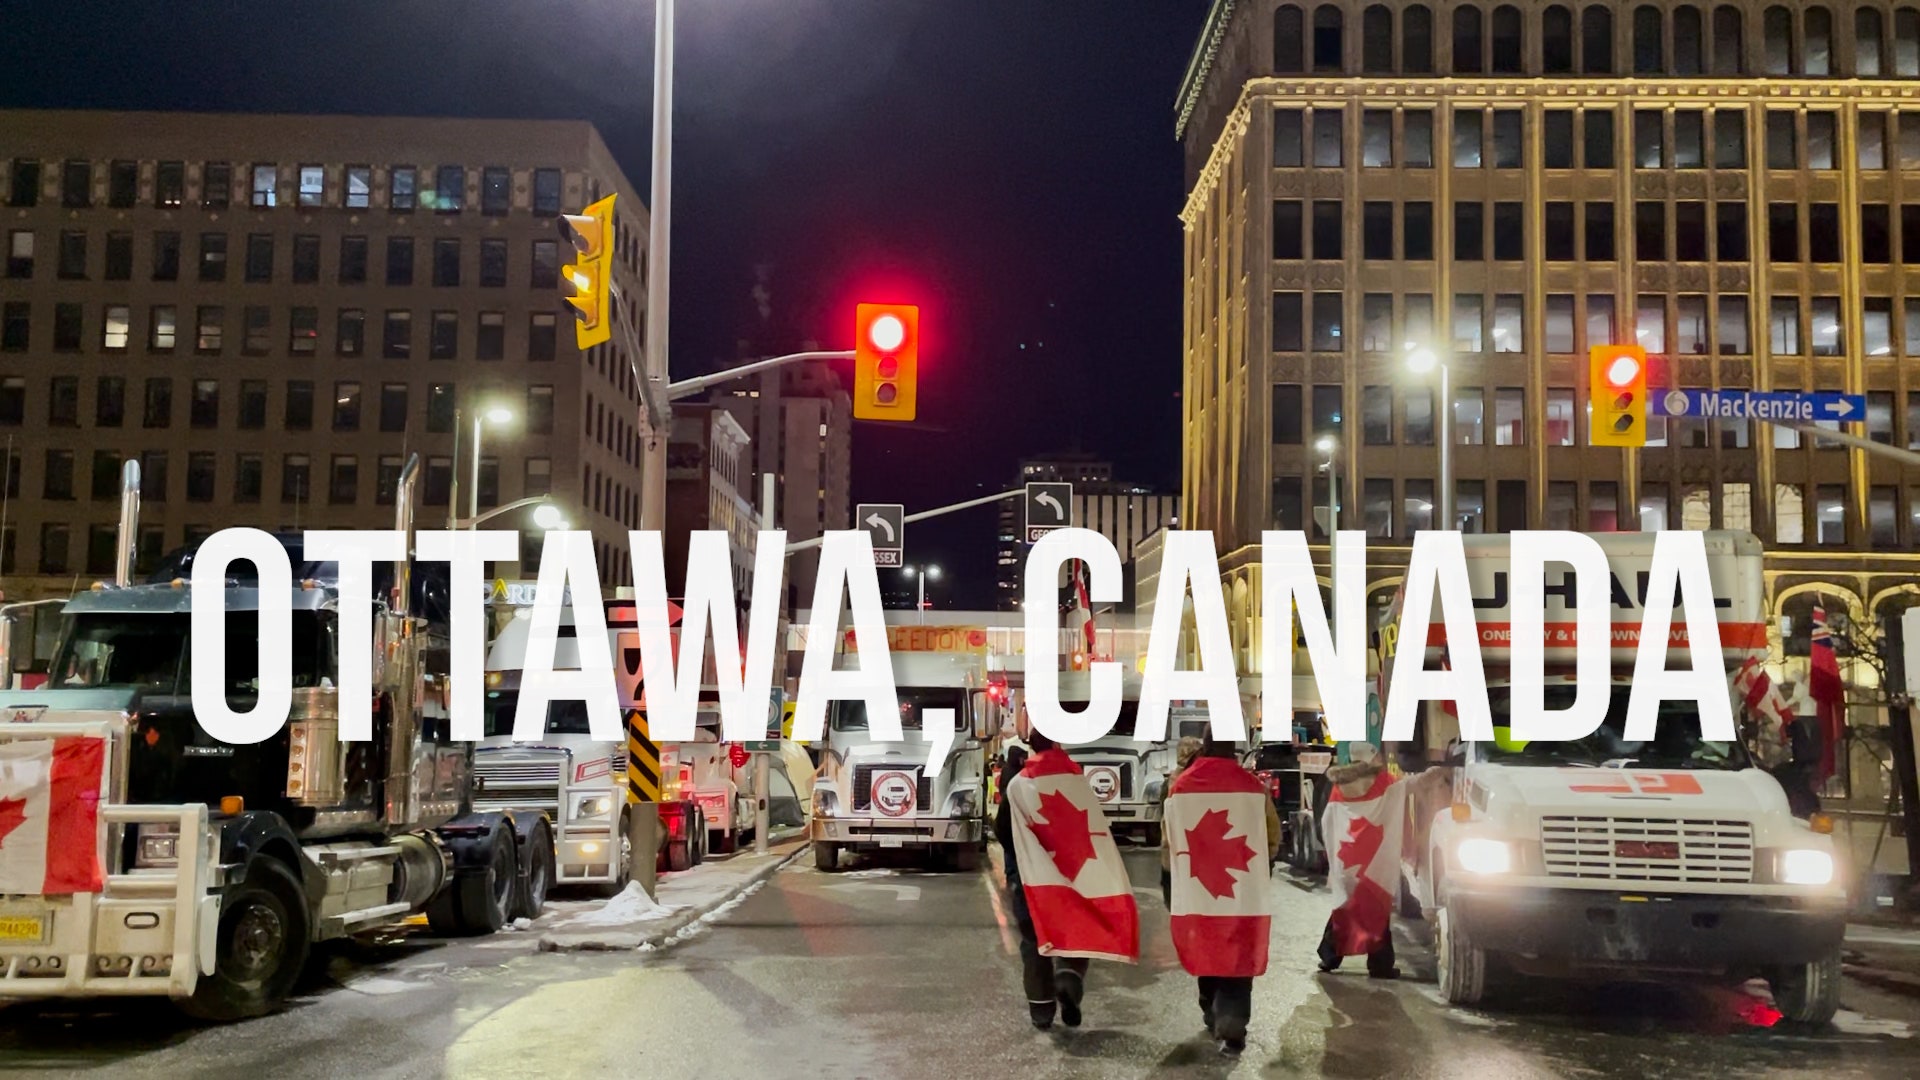 Canadian truckers react to Ontario easing COVID-19 restrictions: 'That's not enough'